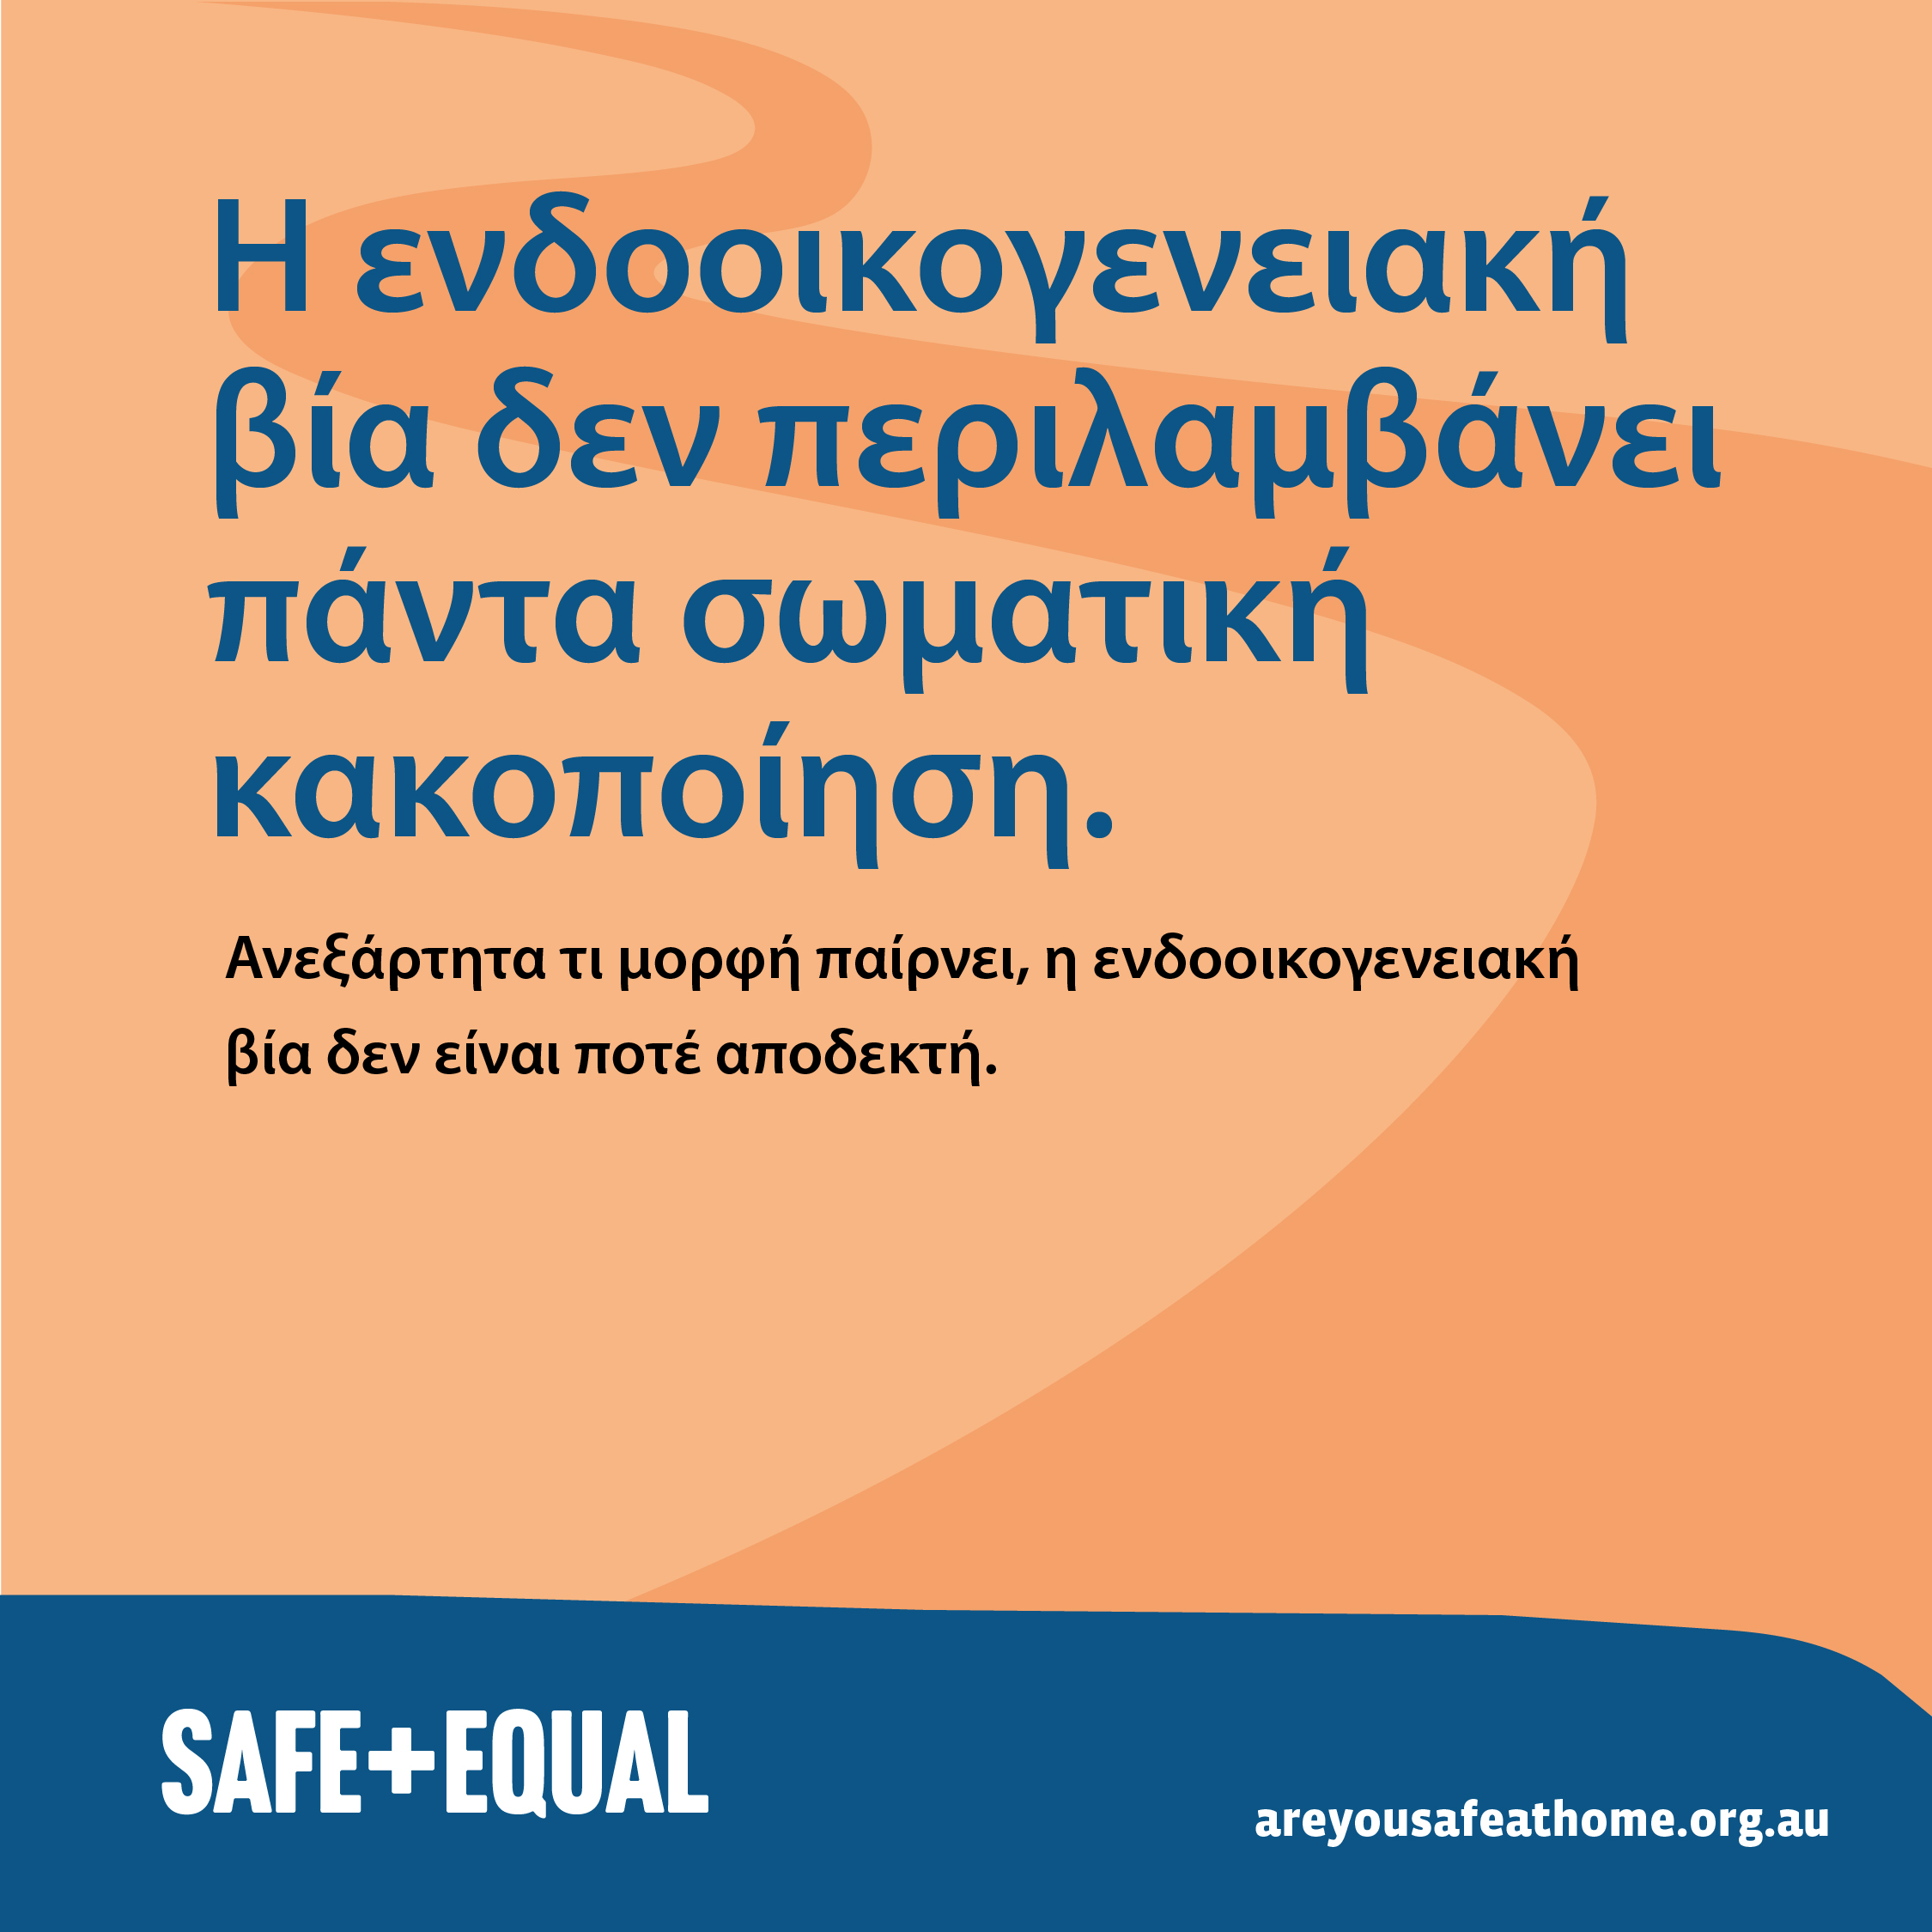 Social media tile for Are you safe at home translated into Greek